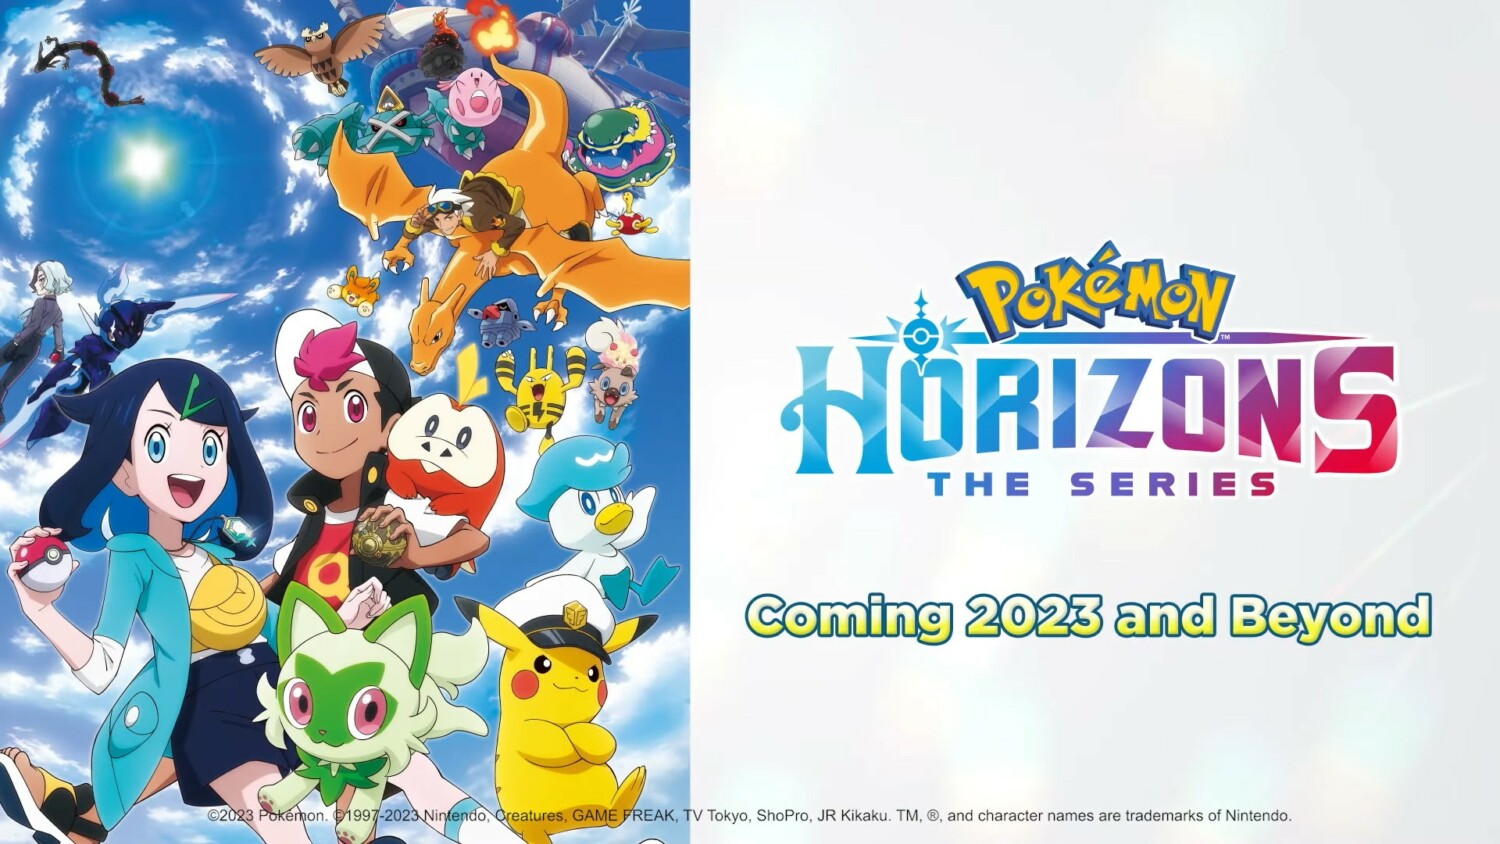 “Pokemon Horizons The Series” Officially Announced As The Name Of The